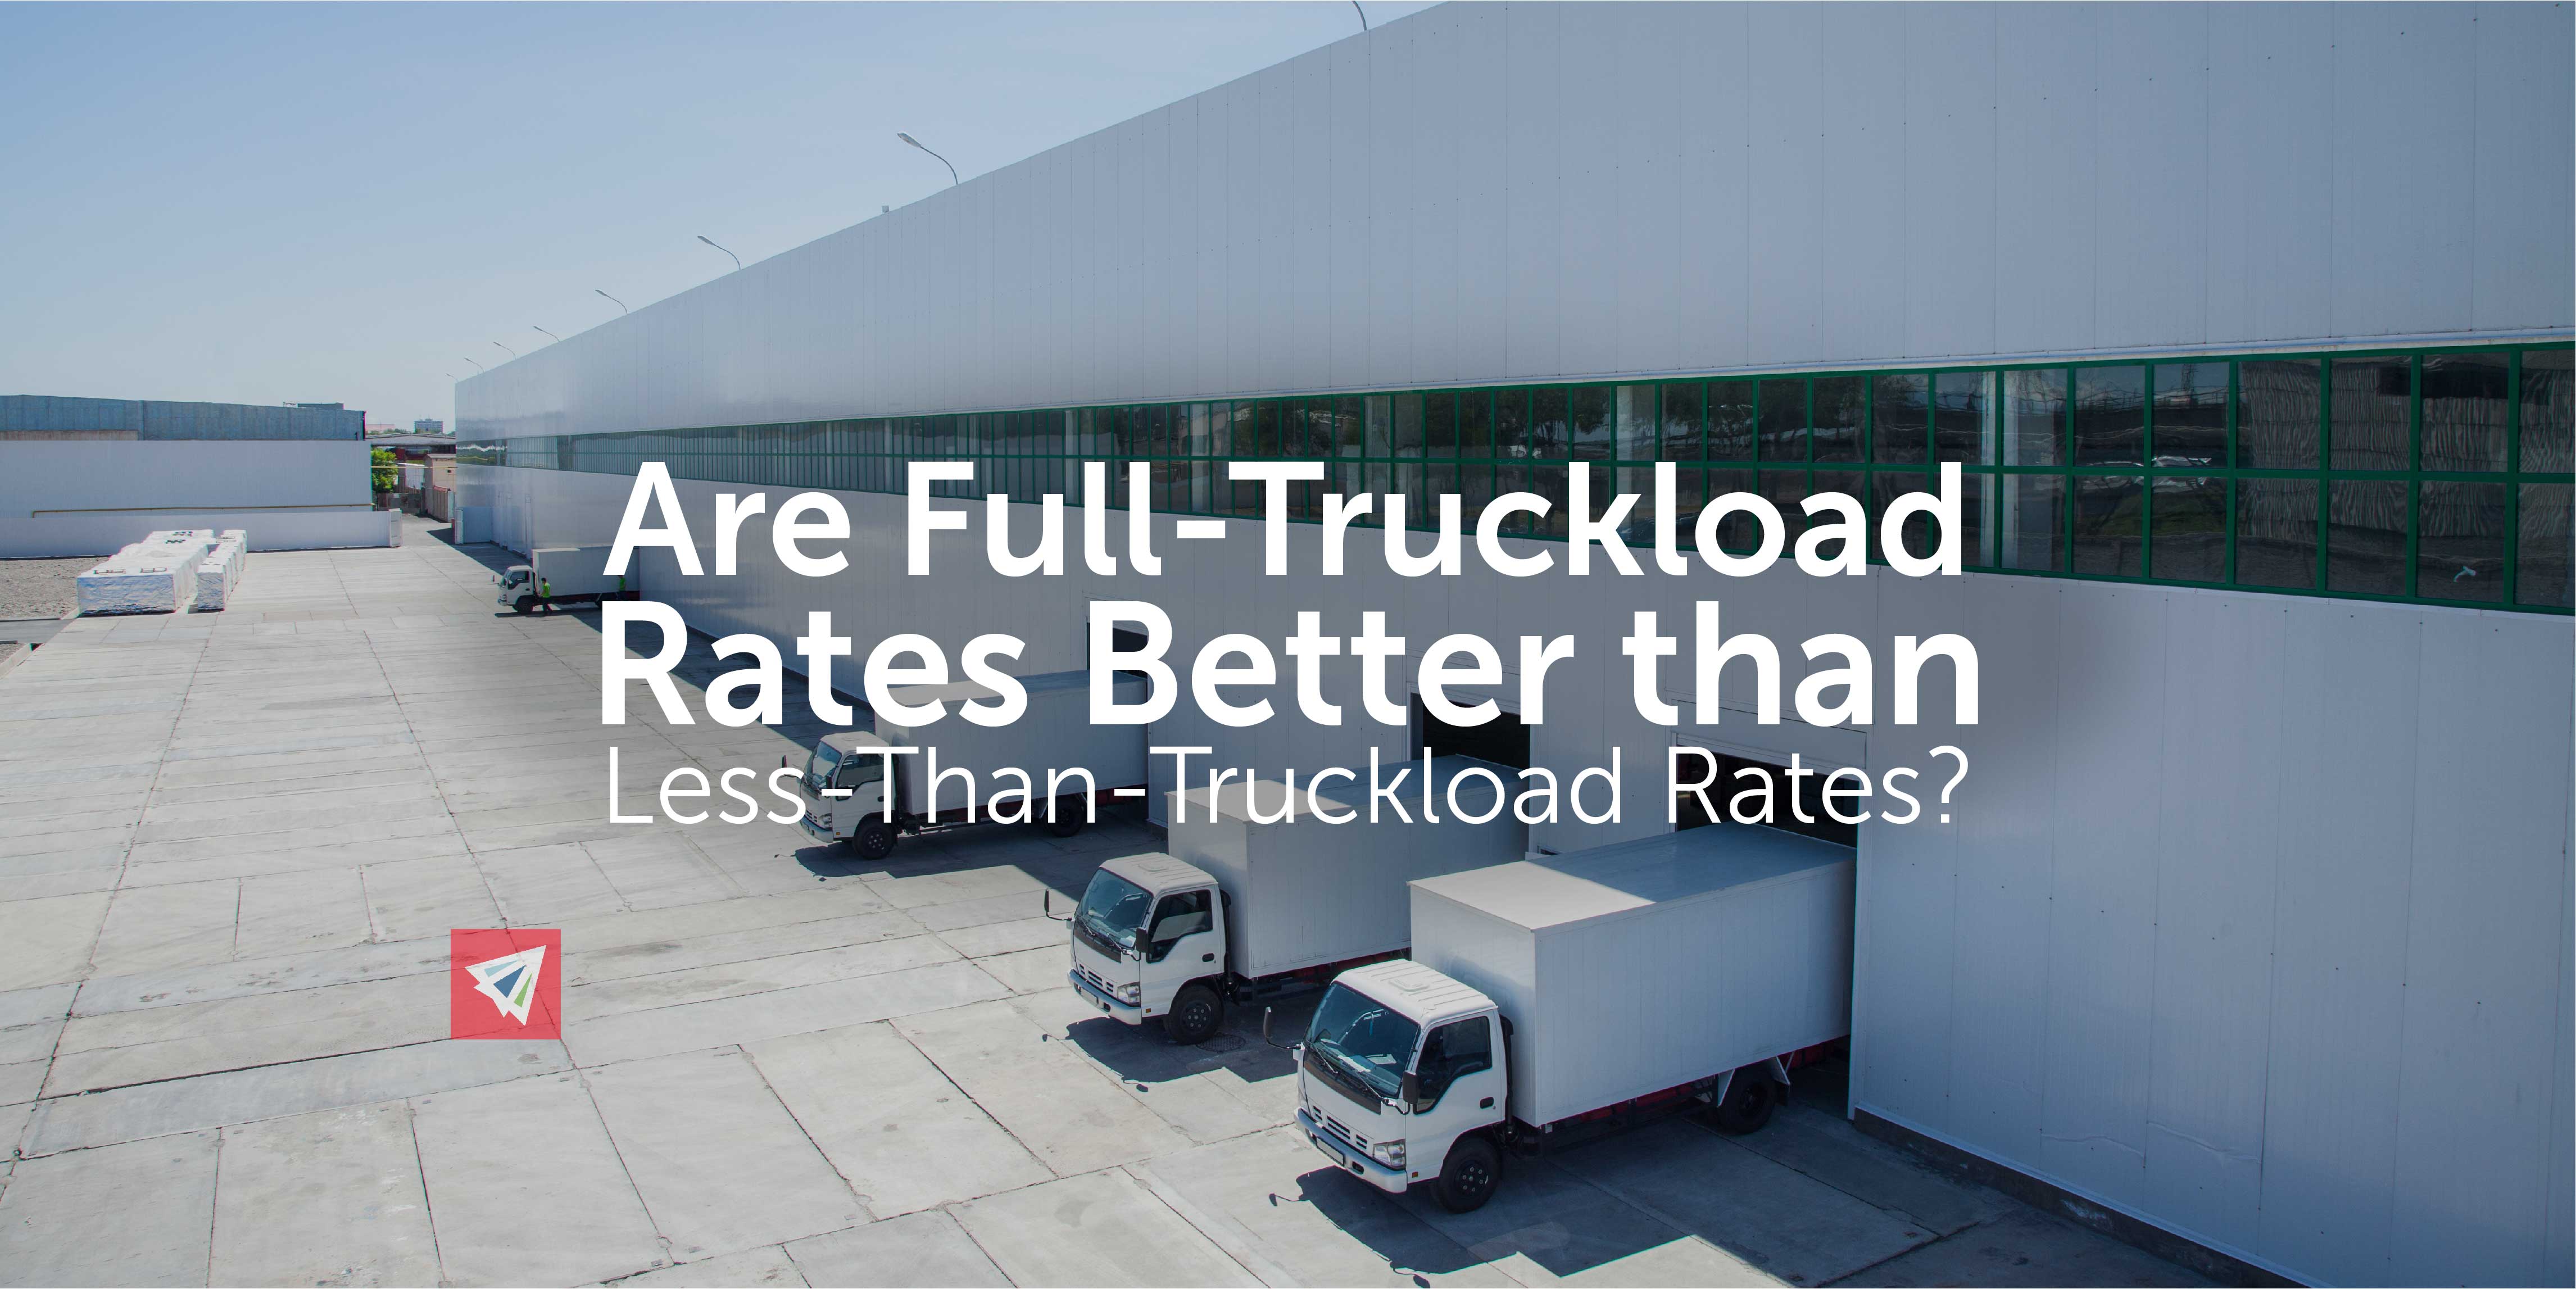 Are Full Truckload Rates Better than Less Than Truckload Rates?